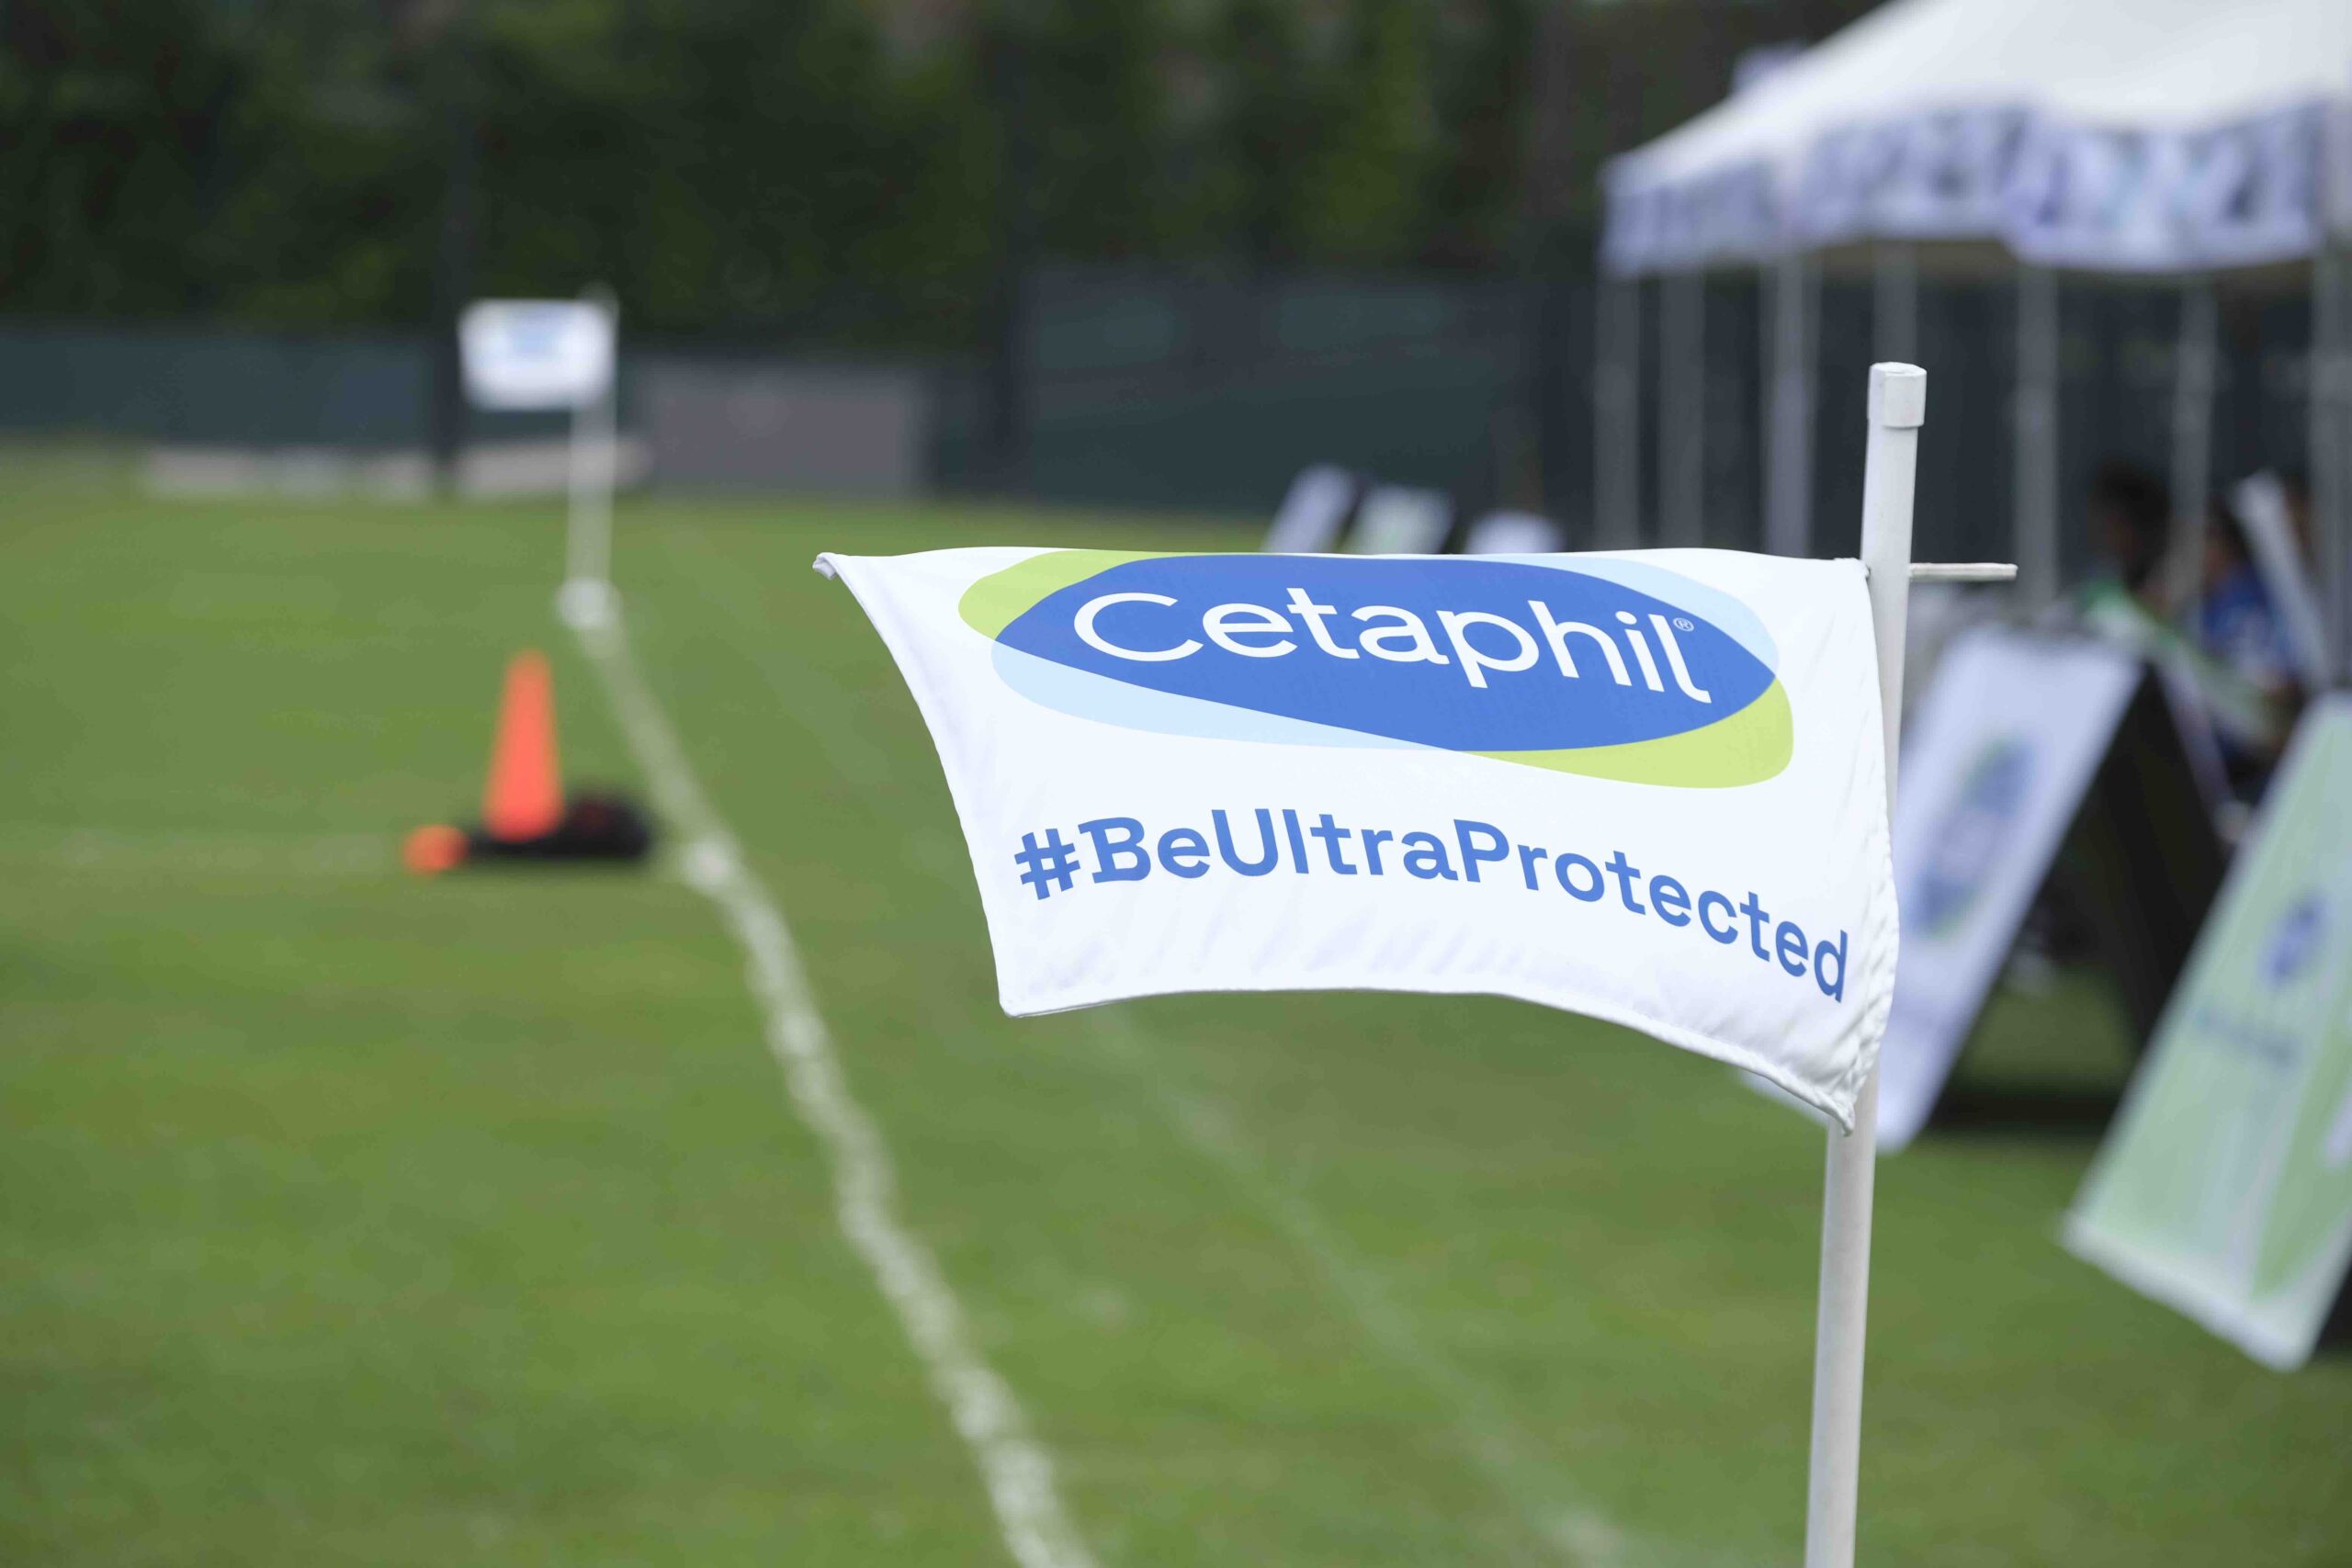 Cetaphil Ultra Protect
